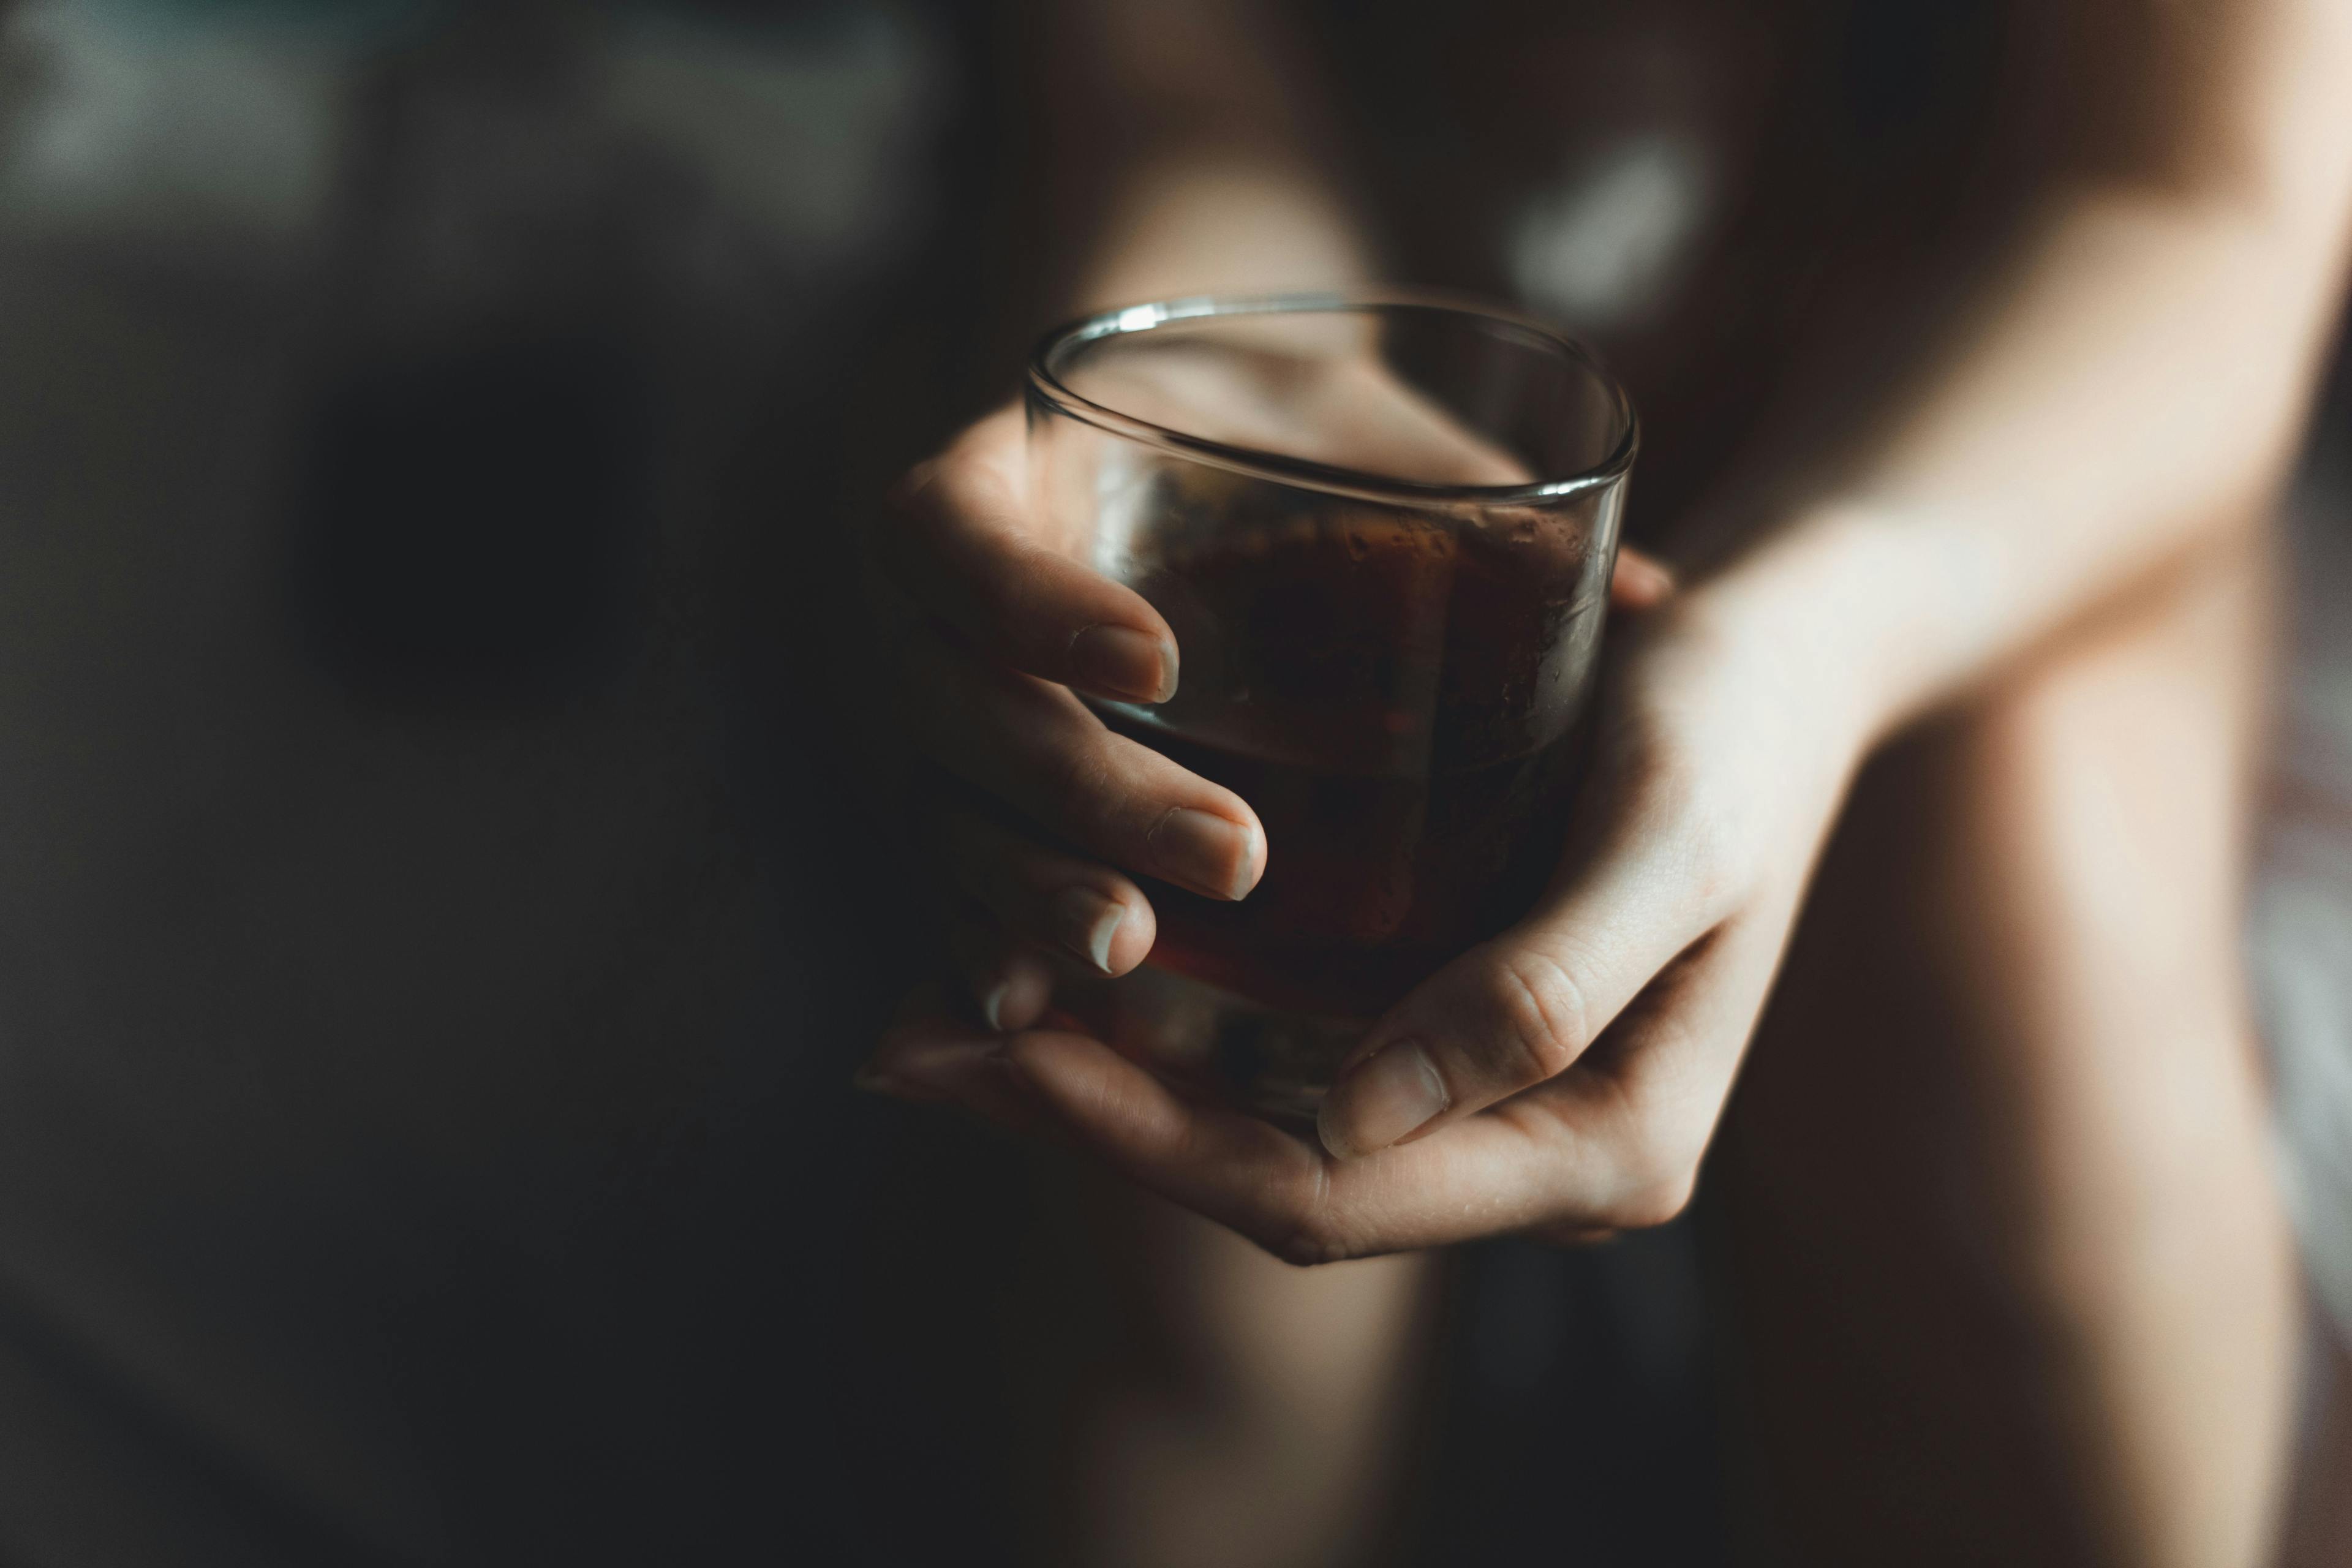 woman's hand with alcohol drink in glass with copy space - Image credit: Danil Nikonov | stock.adobe.com 